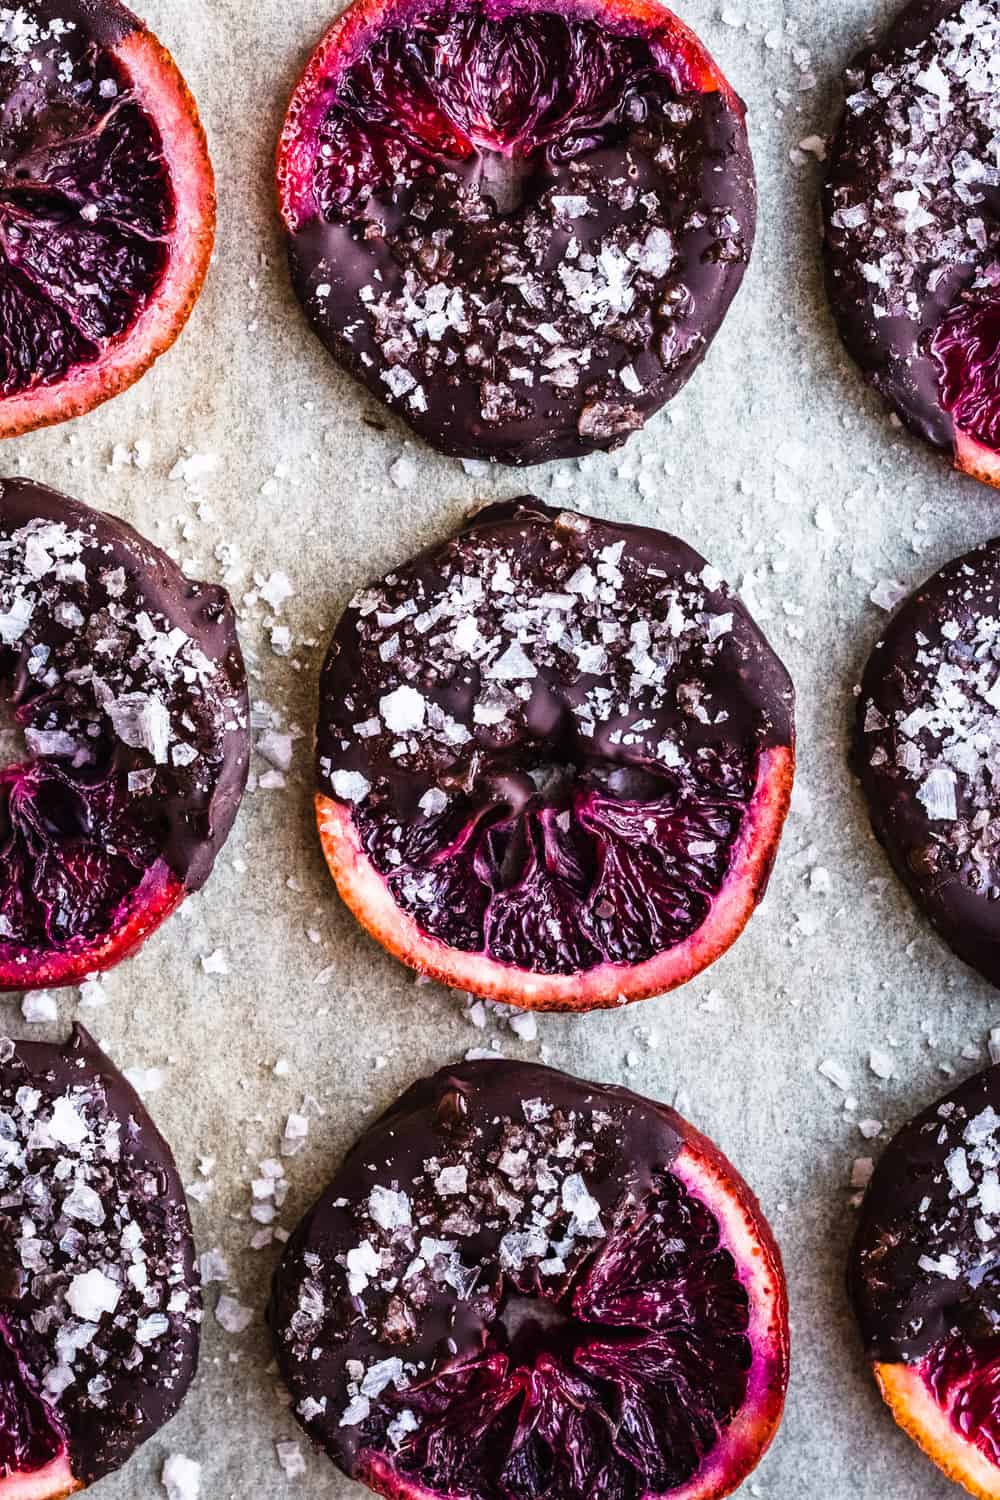 Candied Blood Oranges dipped in Chocolate with Flaky Sea Salt on parchment paper.